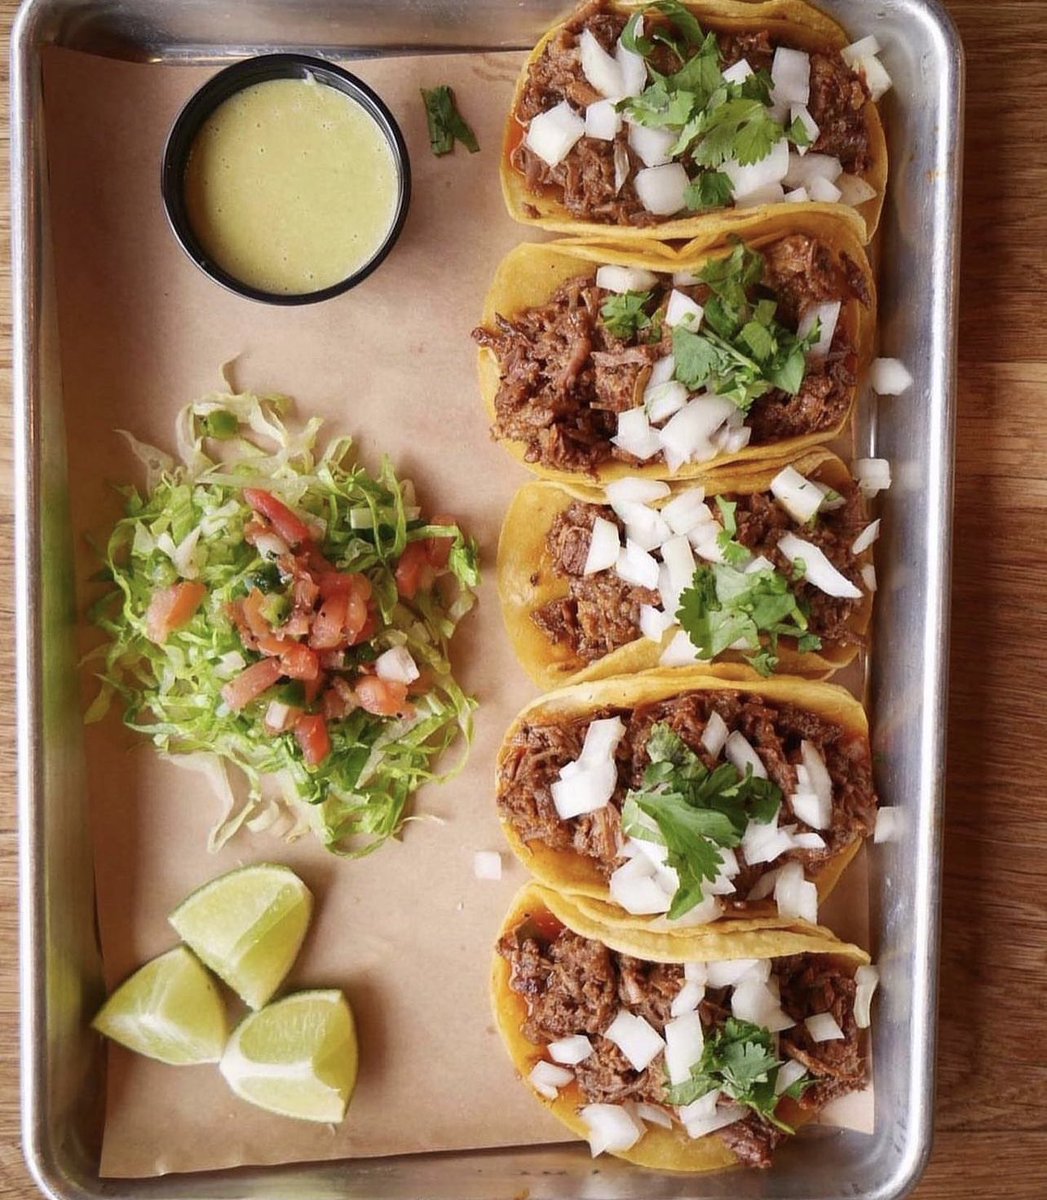 You say #Thursday we say #Taco Don’t skip out on those Brisket Barbacoa & Pork Carnitas Mini Street Tacos today! 5 Mini Tacos on a plate with that house Verde sauce. Get on by. Only on #Thursday at The Switch. #TexasBBQ #Tacos #AustinTexas #BBQ #Barbecue #DrippingSprings